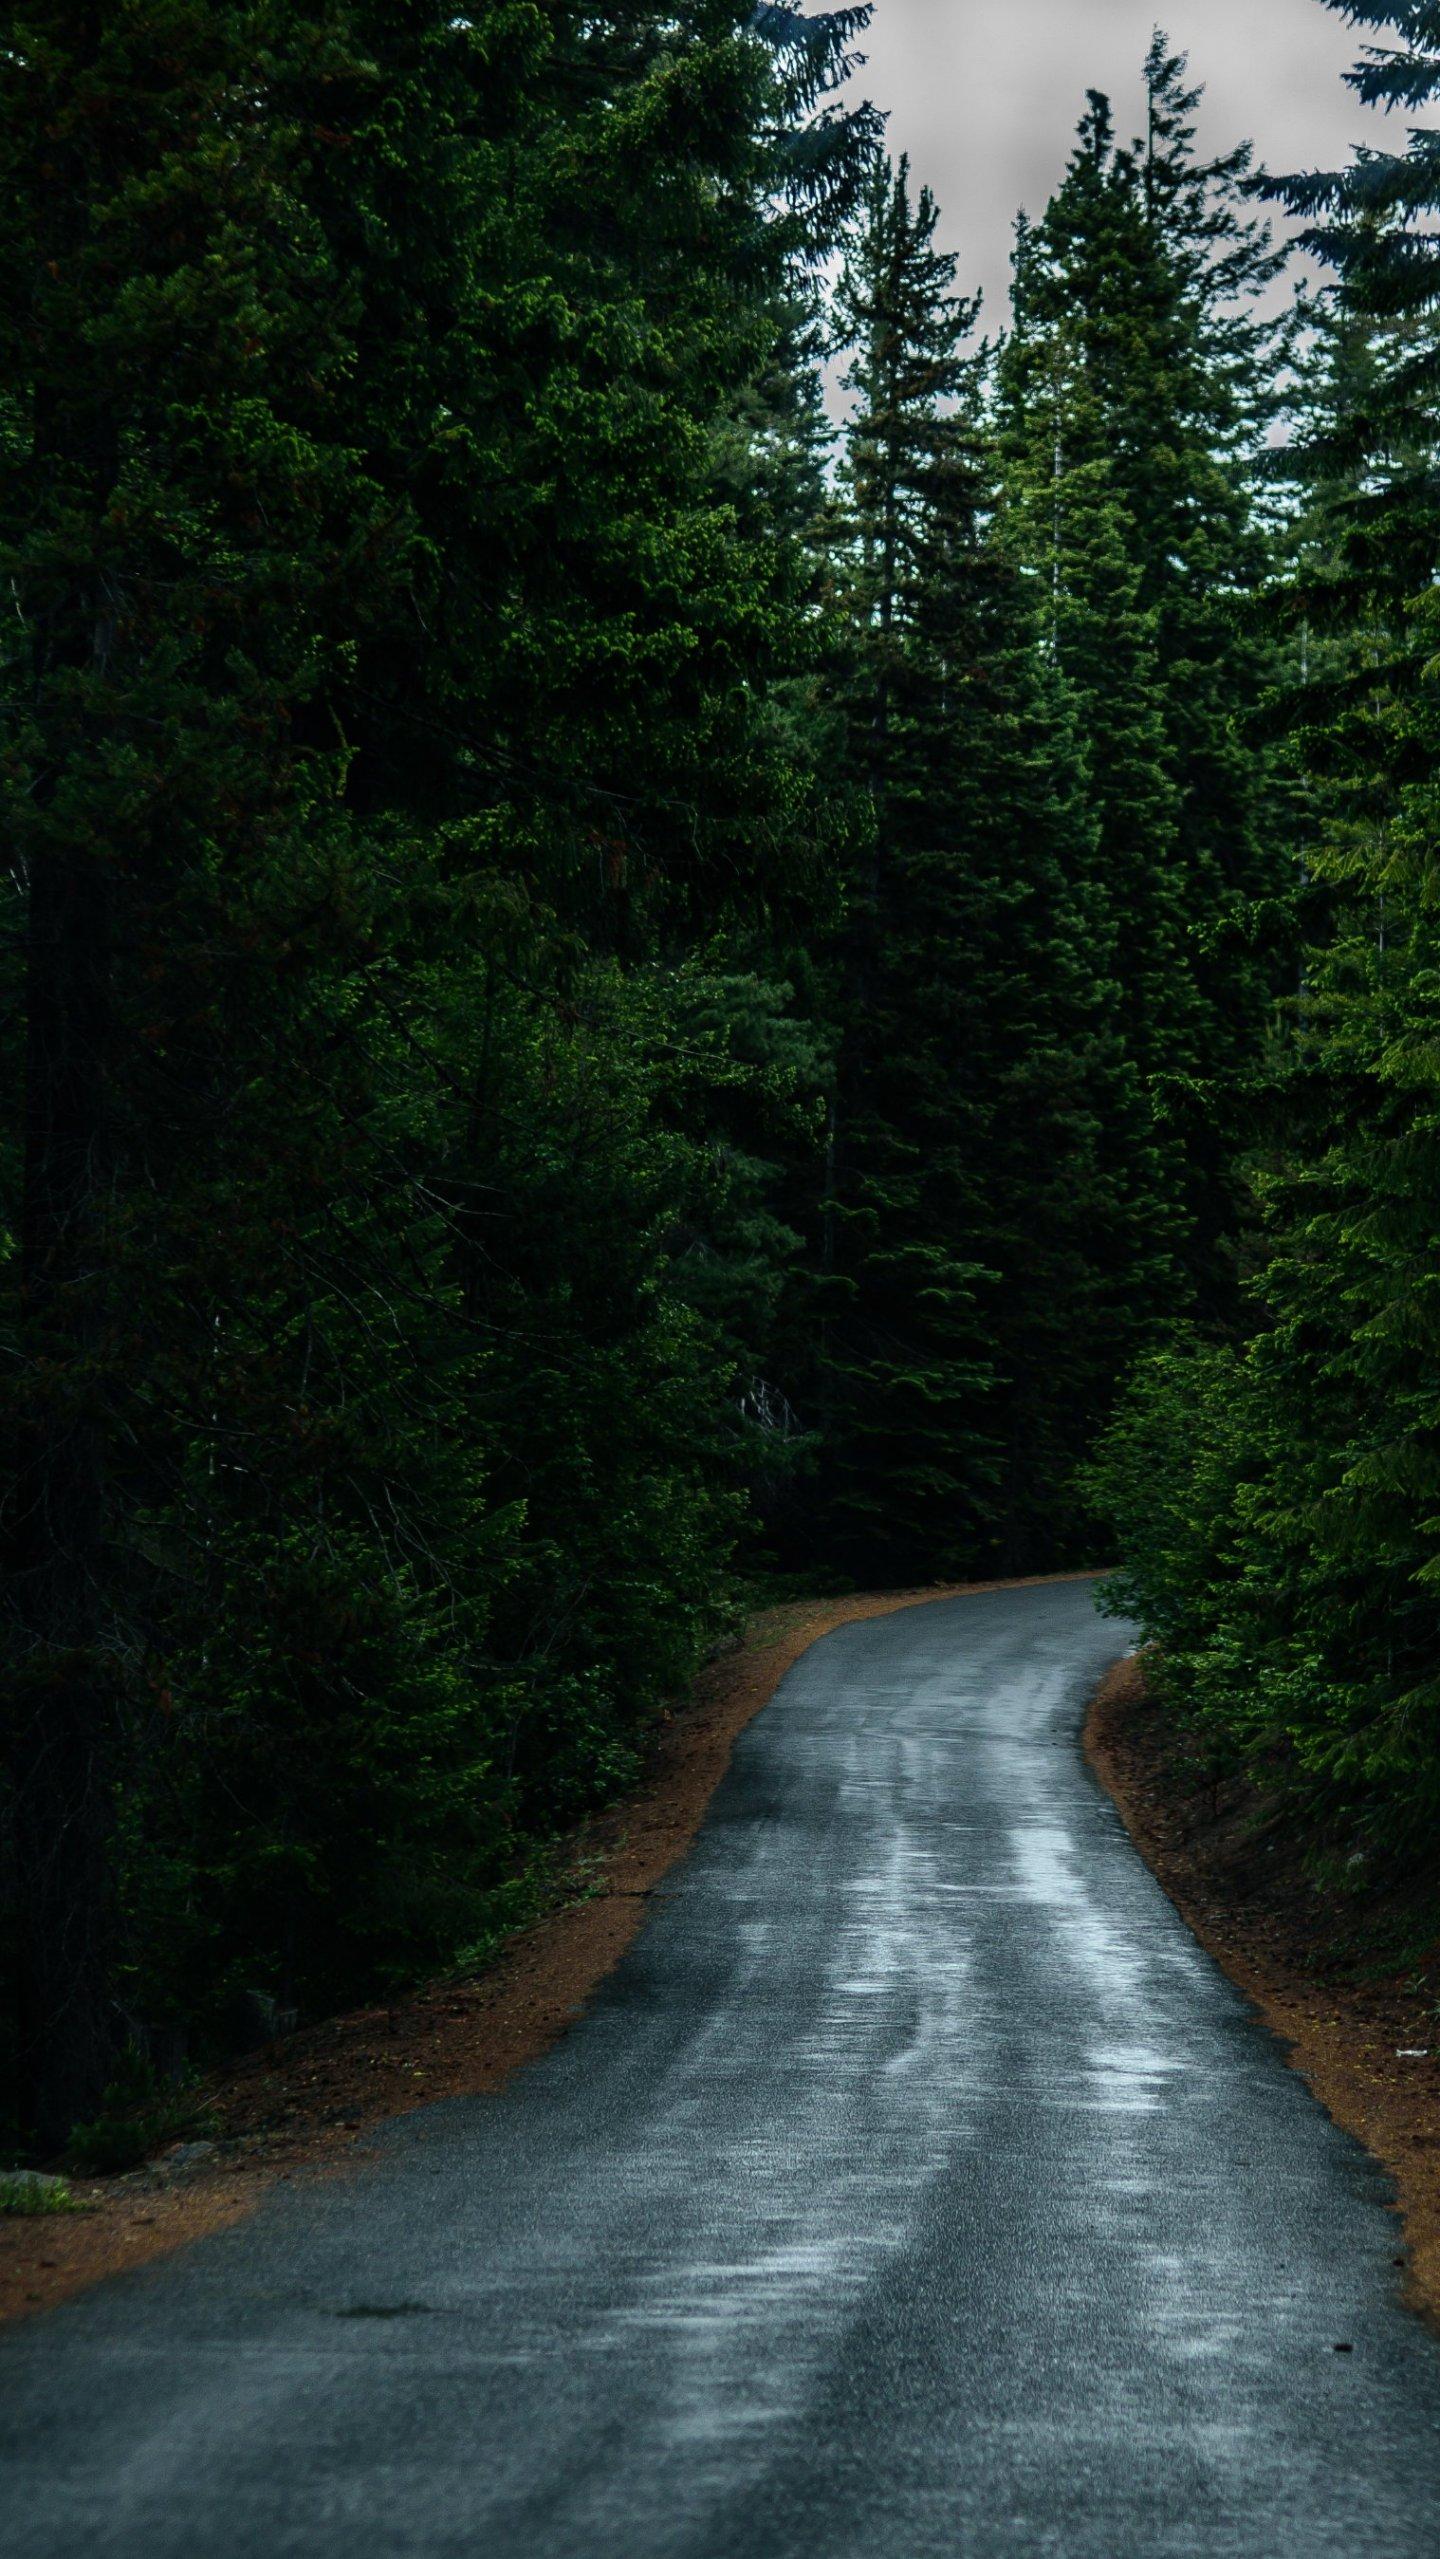 Road Through Forest Wallpaper   iPhone Android Desktop Backgrounds